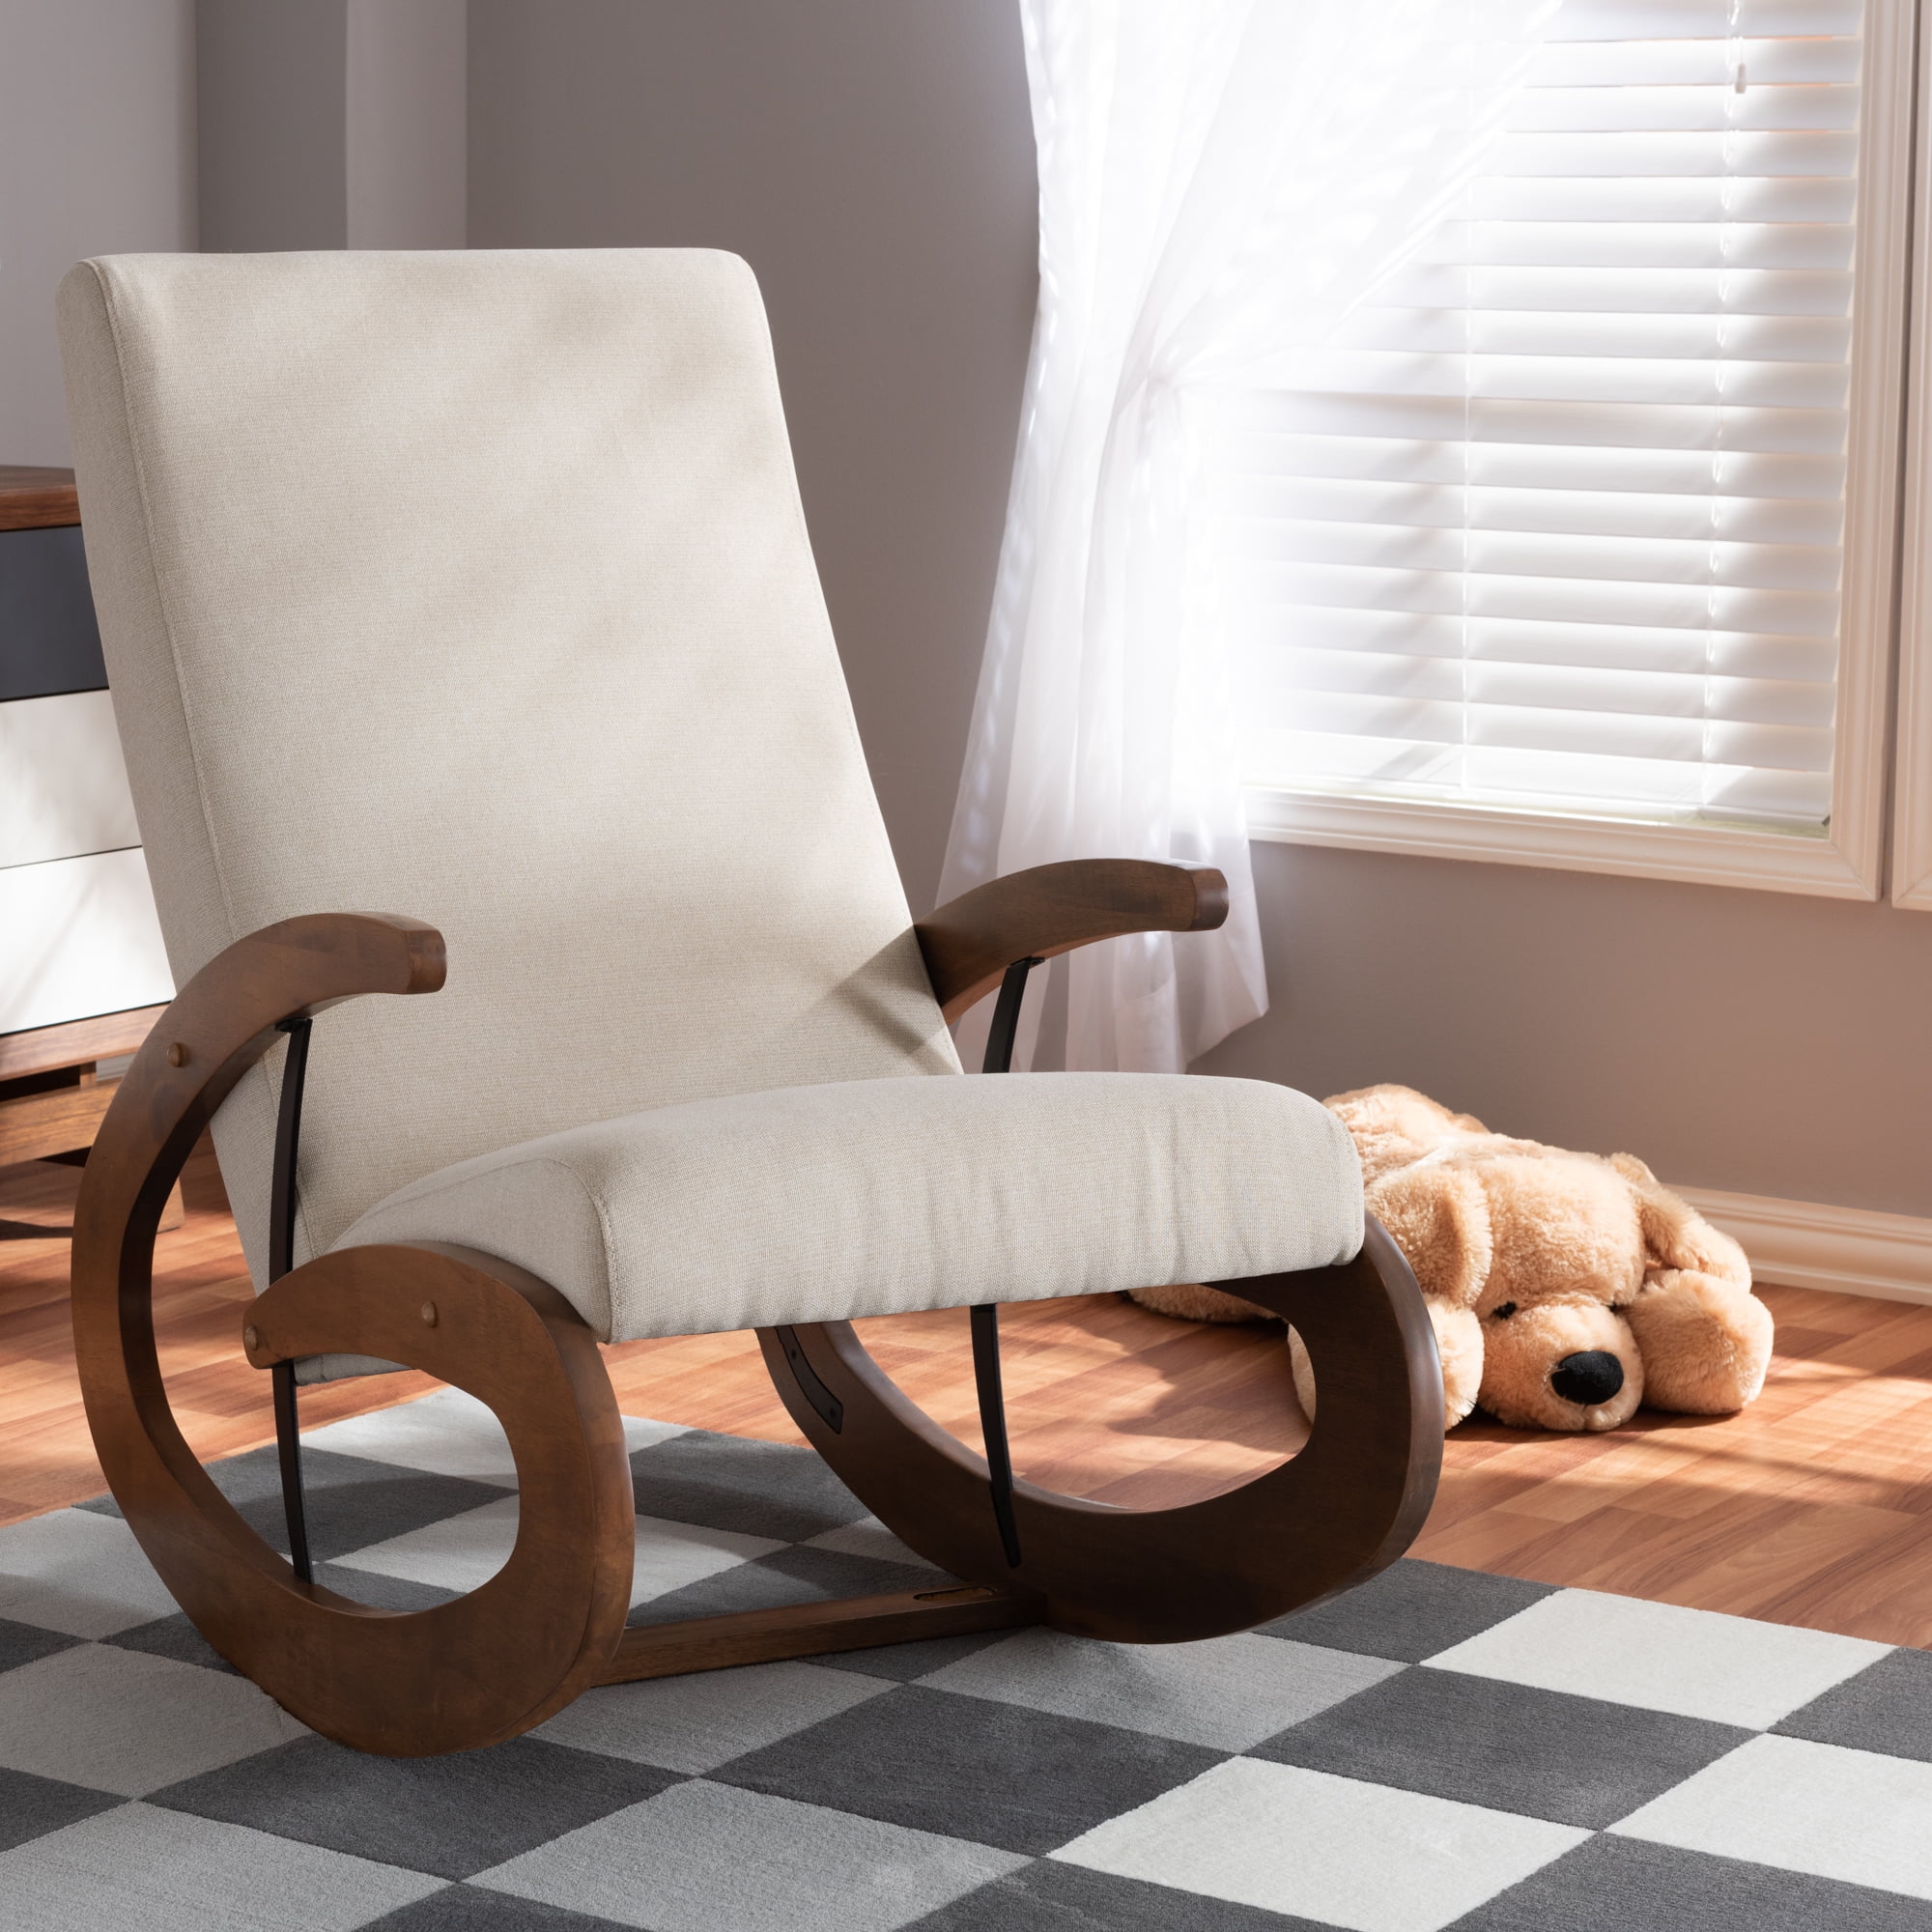 emerson rocking chair with bassinet